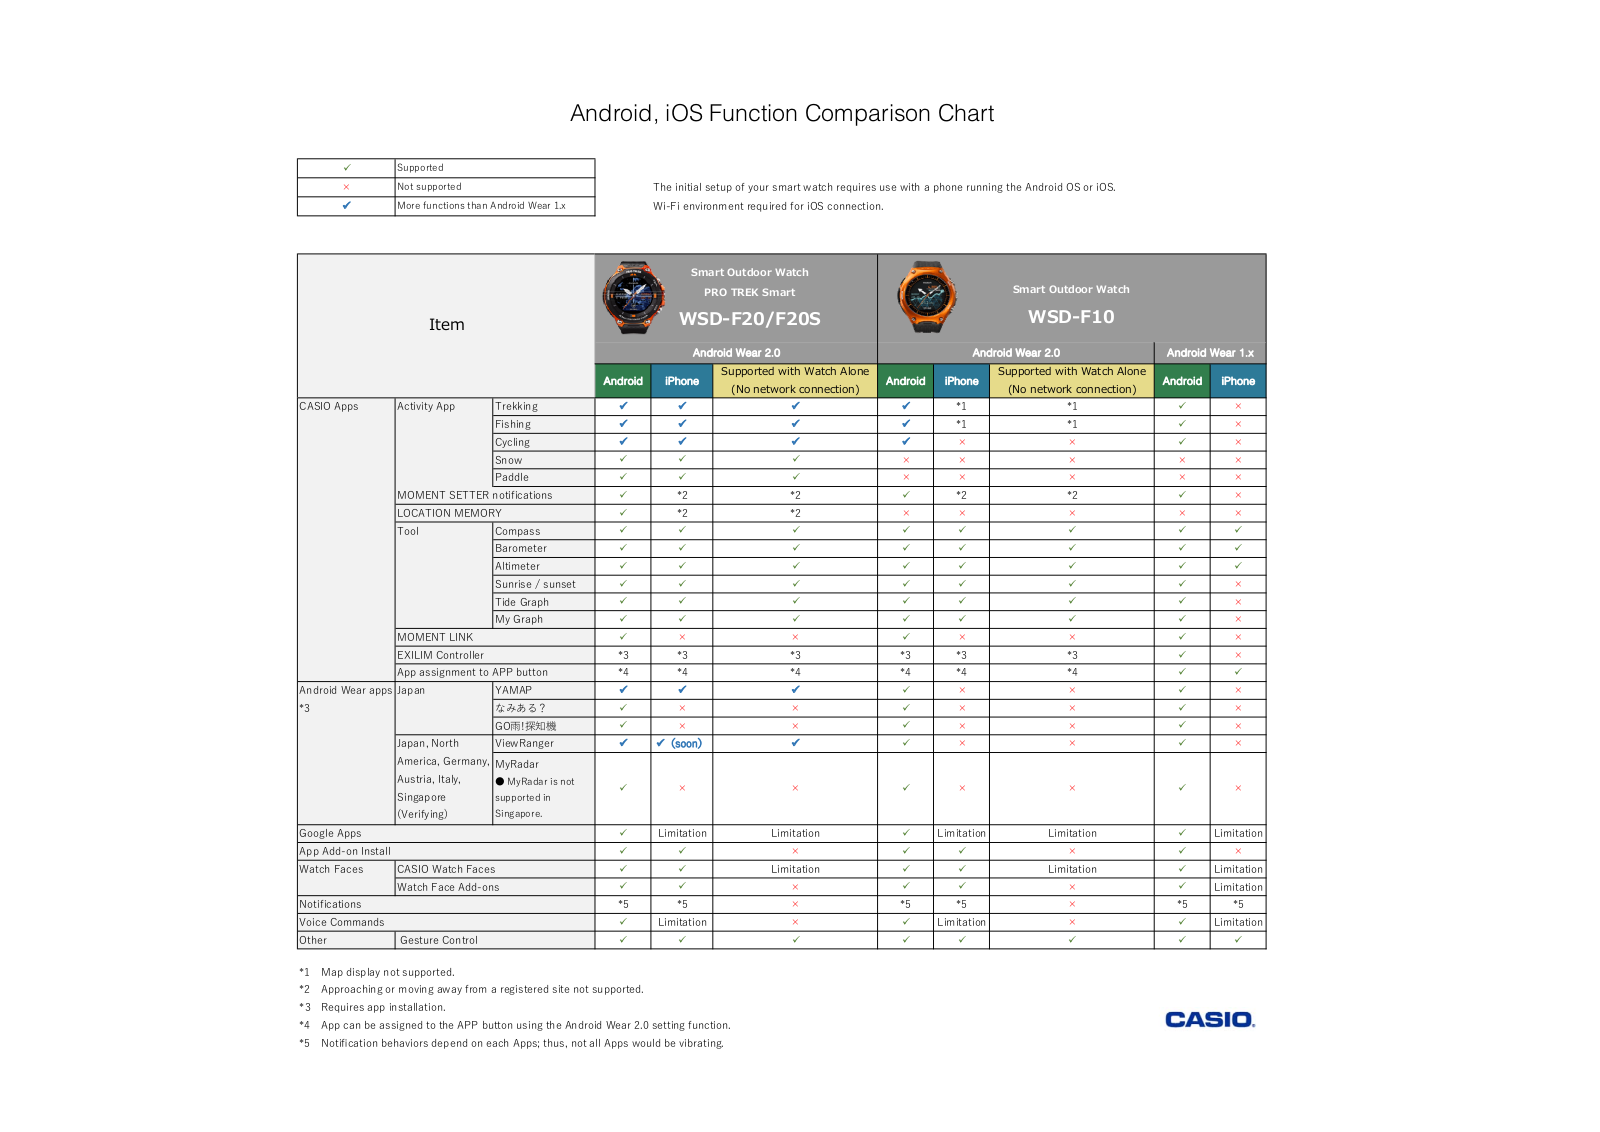 Casio Android iOS Function Comparison Chart